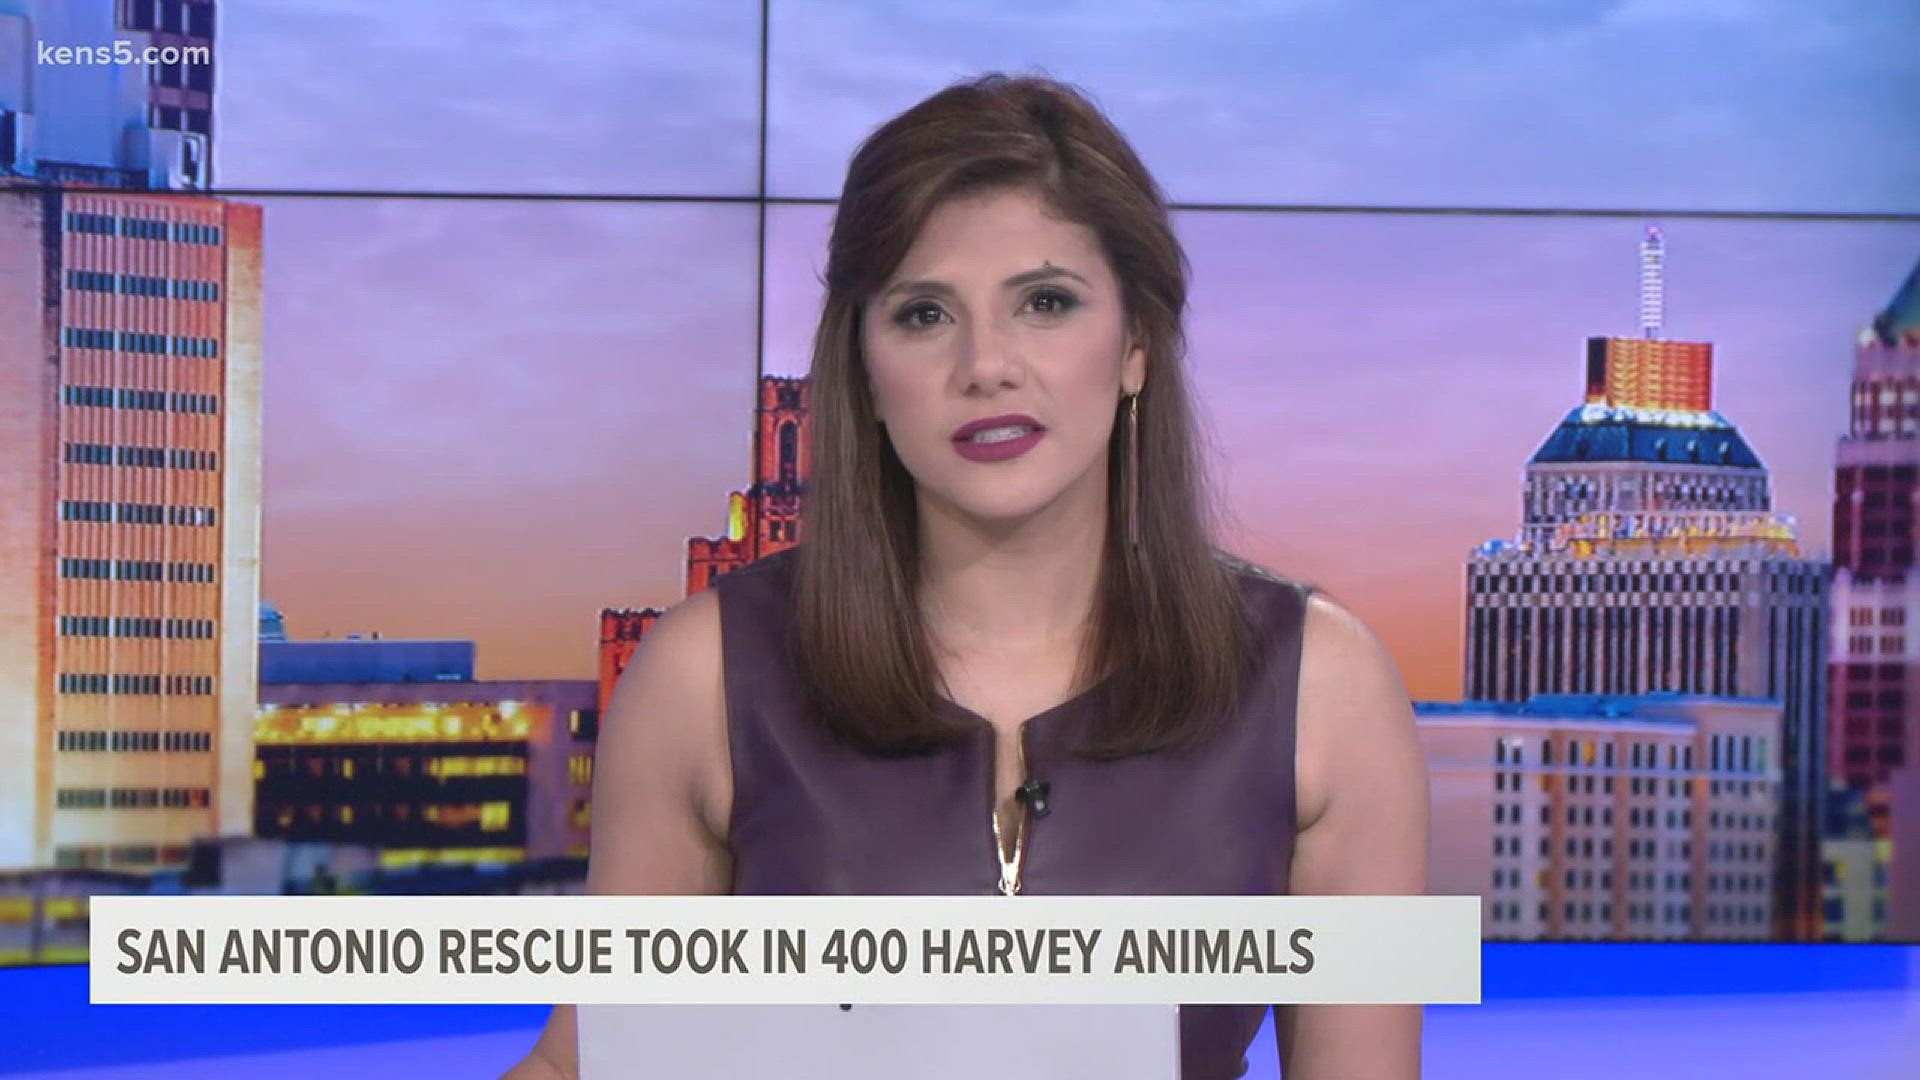 The Animal Defense League of Texas took in 400 cats and dogs from storm-ravaged areas.